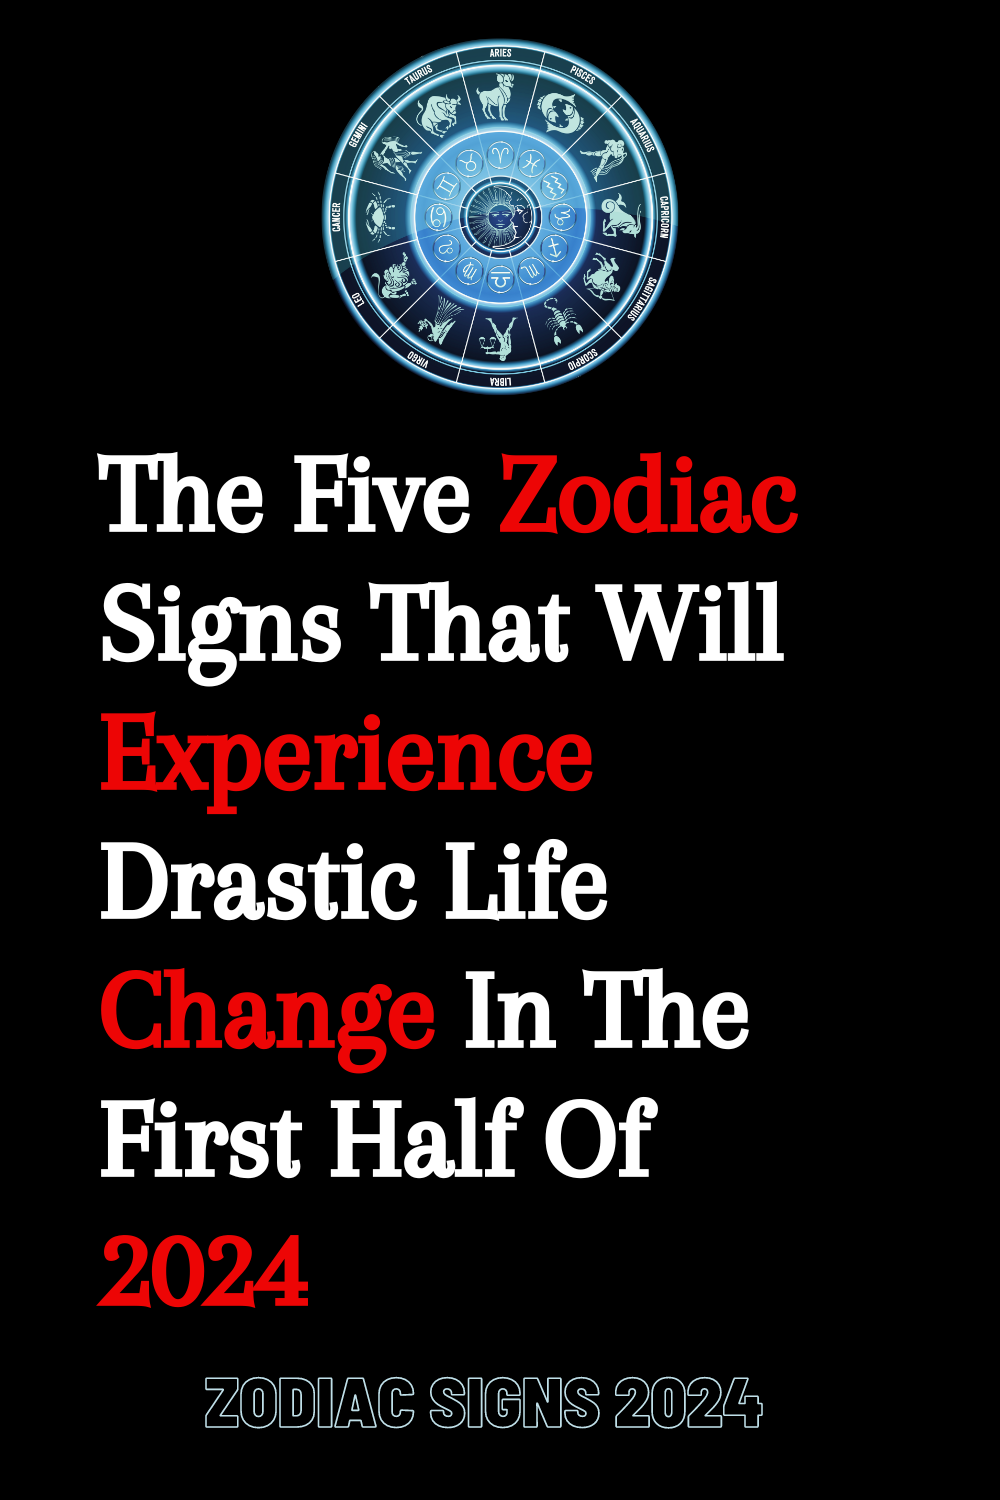 The Five Zodiac Signs That Will Experience Drastic Life Change In The First Half Of 2024